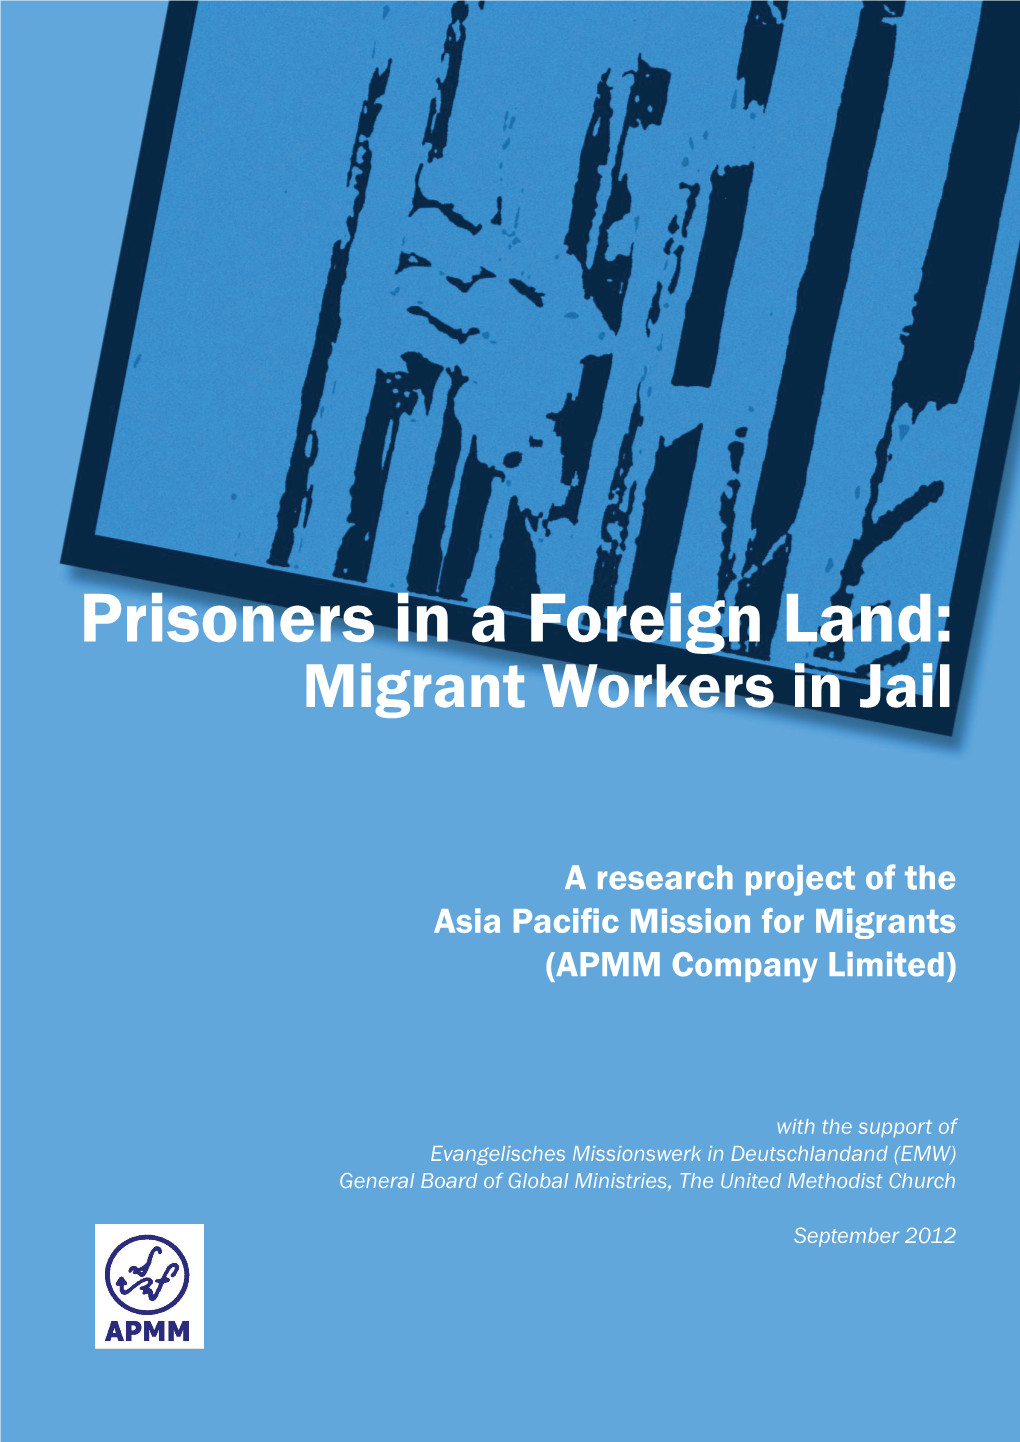 Prisoners in a Foreign Land: Migrant Workers in Jail